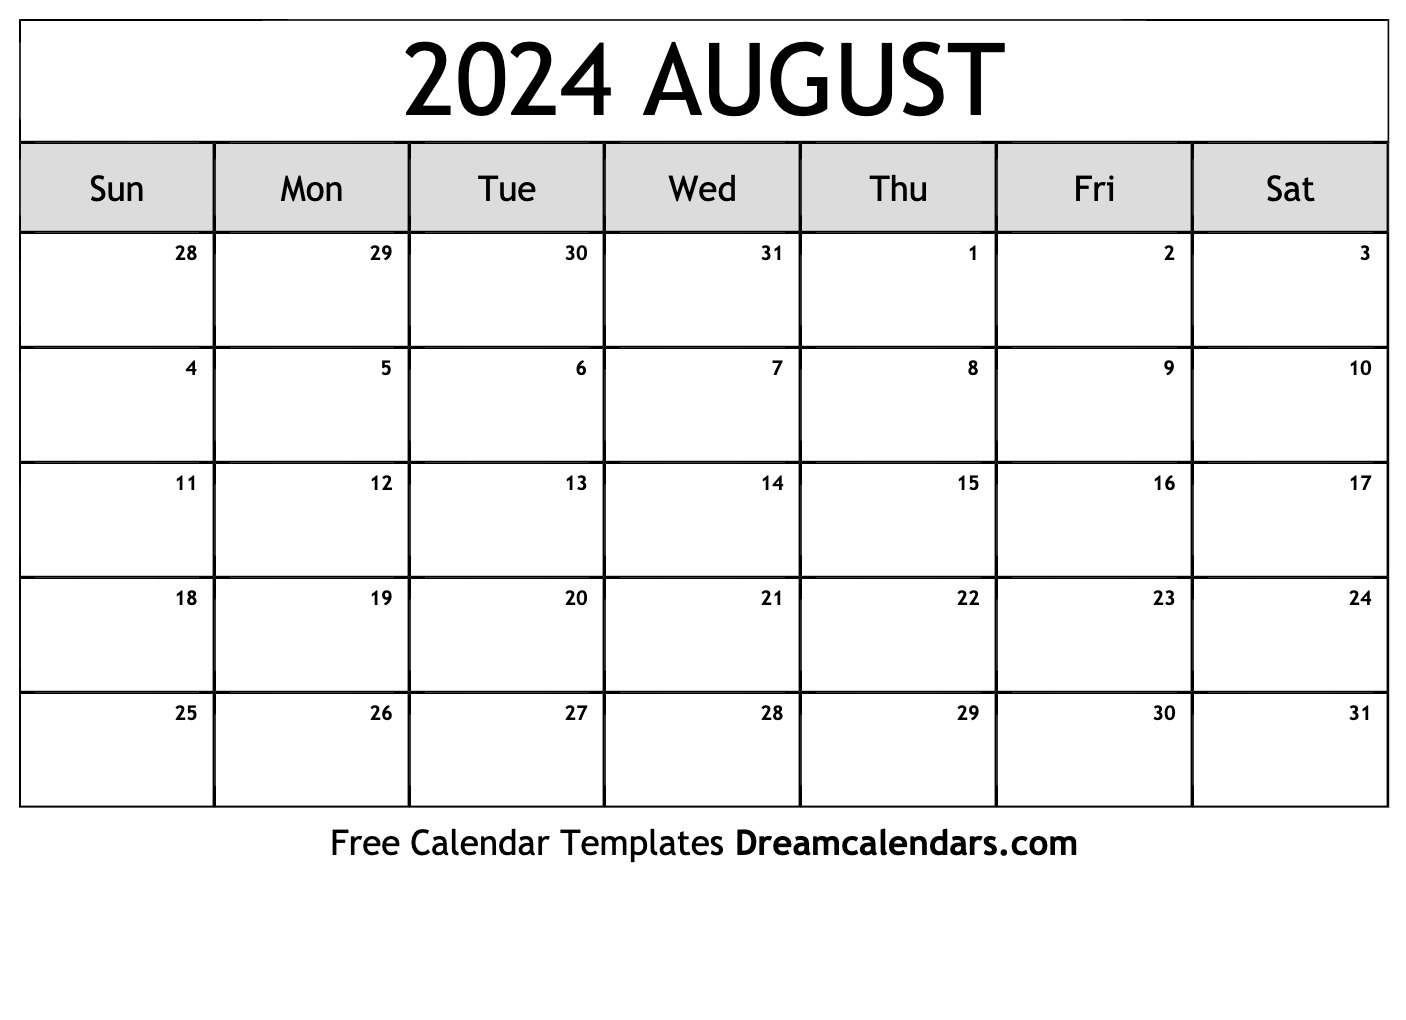 August 2024 Calendar | Free Blank Printable With Holidays for Calendar Template August 2024 Printable